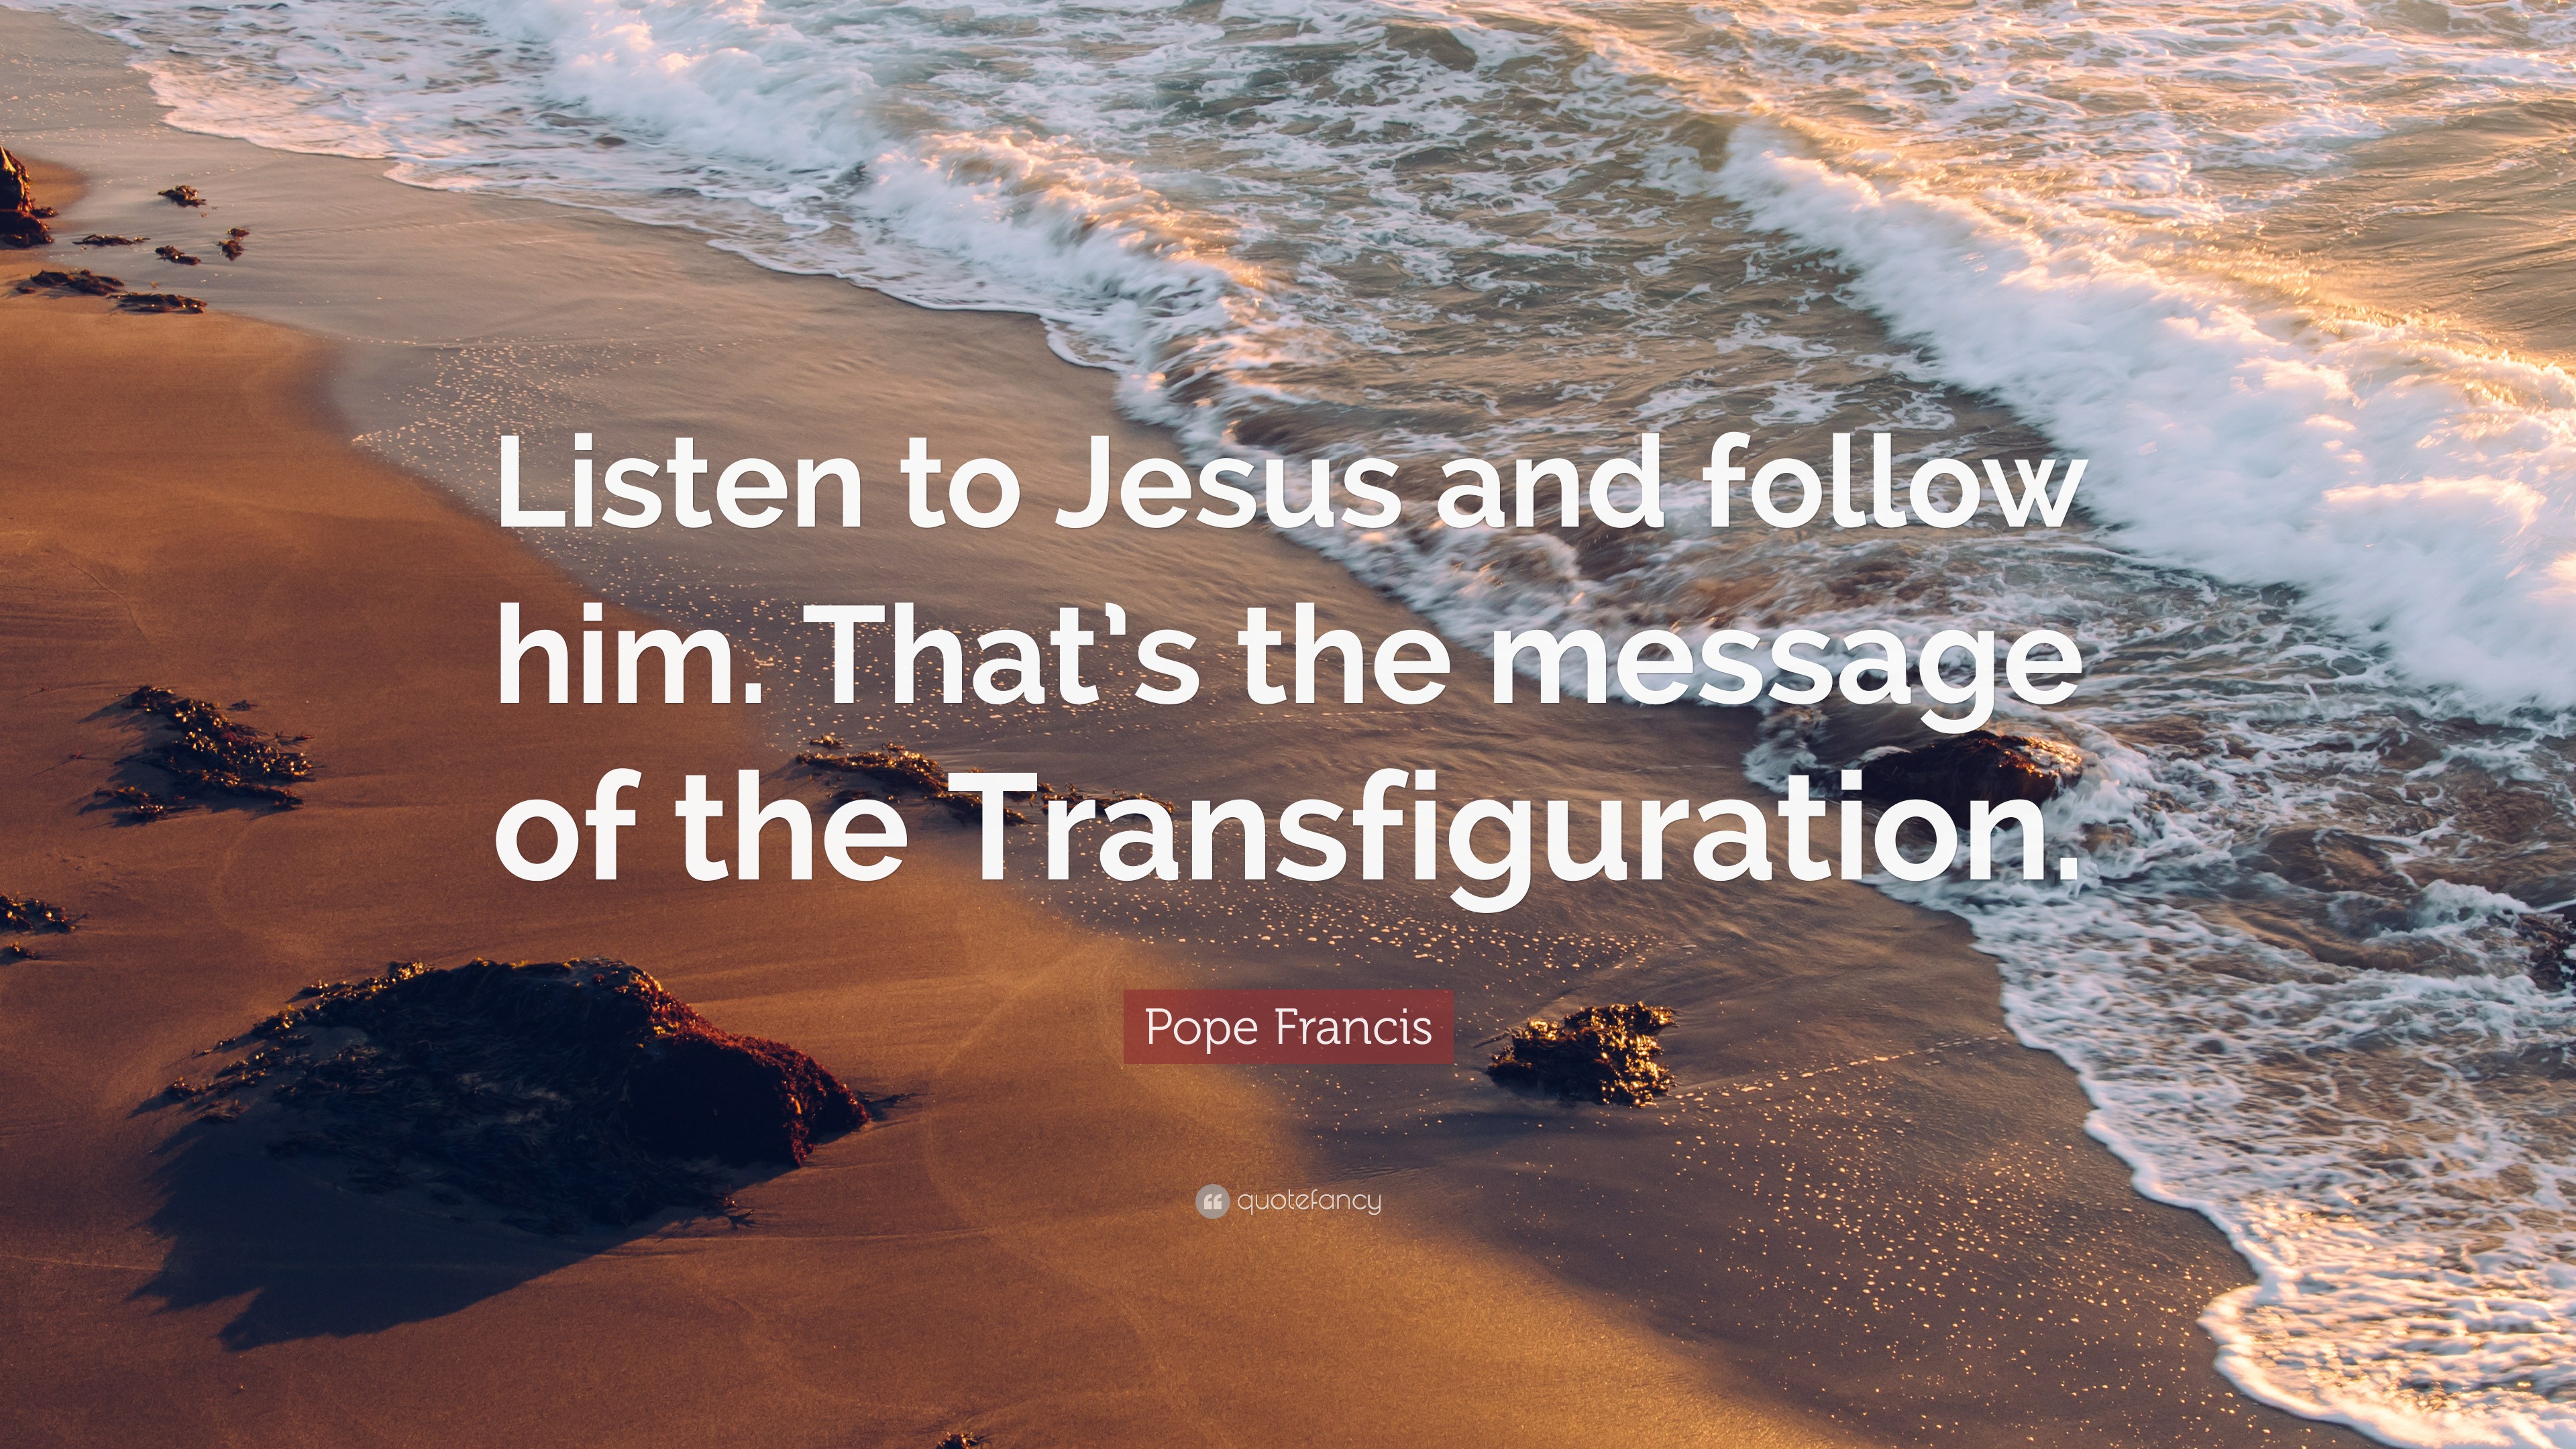 Pope Francis Quote “Listen to Jesus and follow him. That’s the message